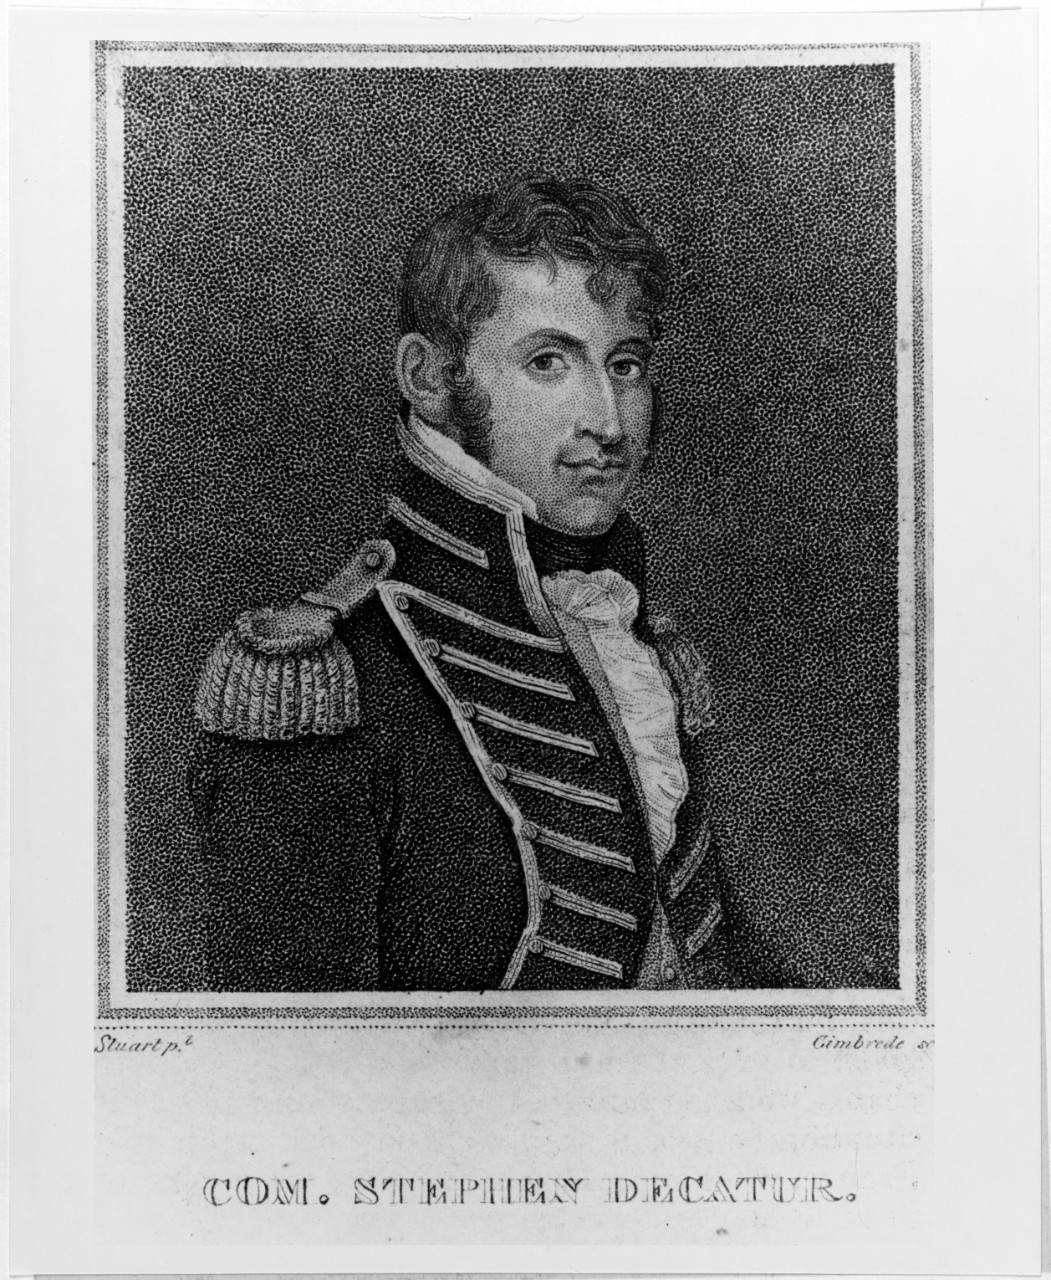 Photo #: NH 50522  Commodore Stephen Decatur, USN